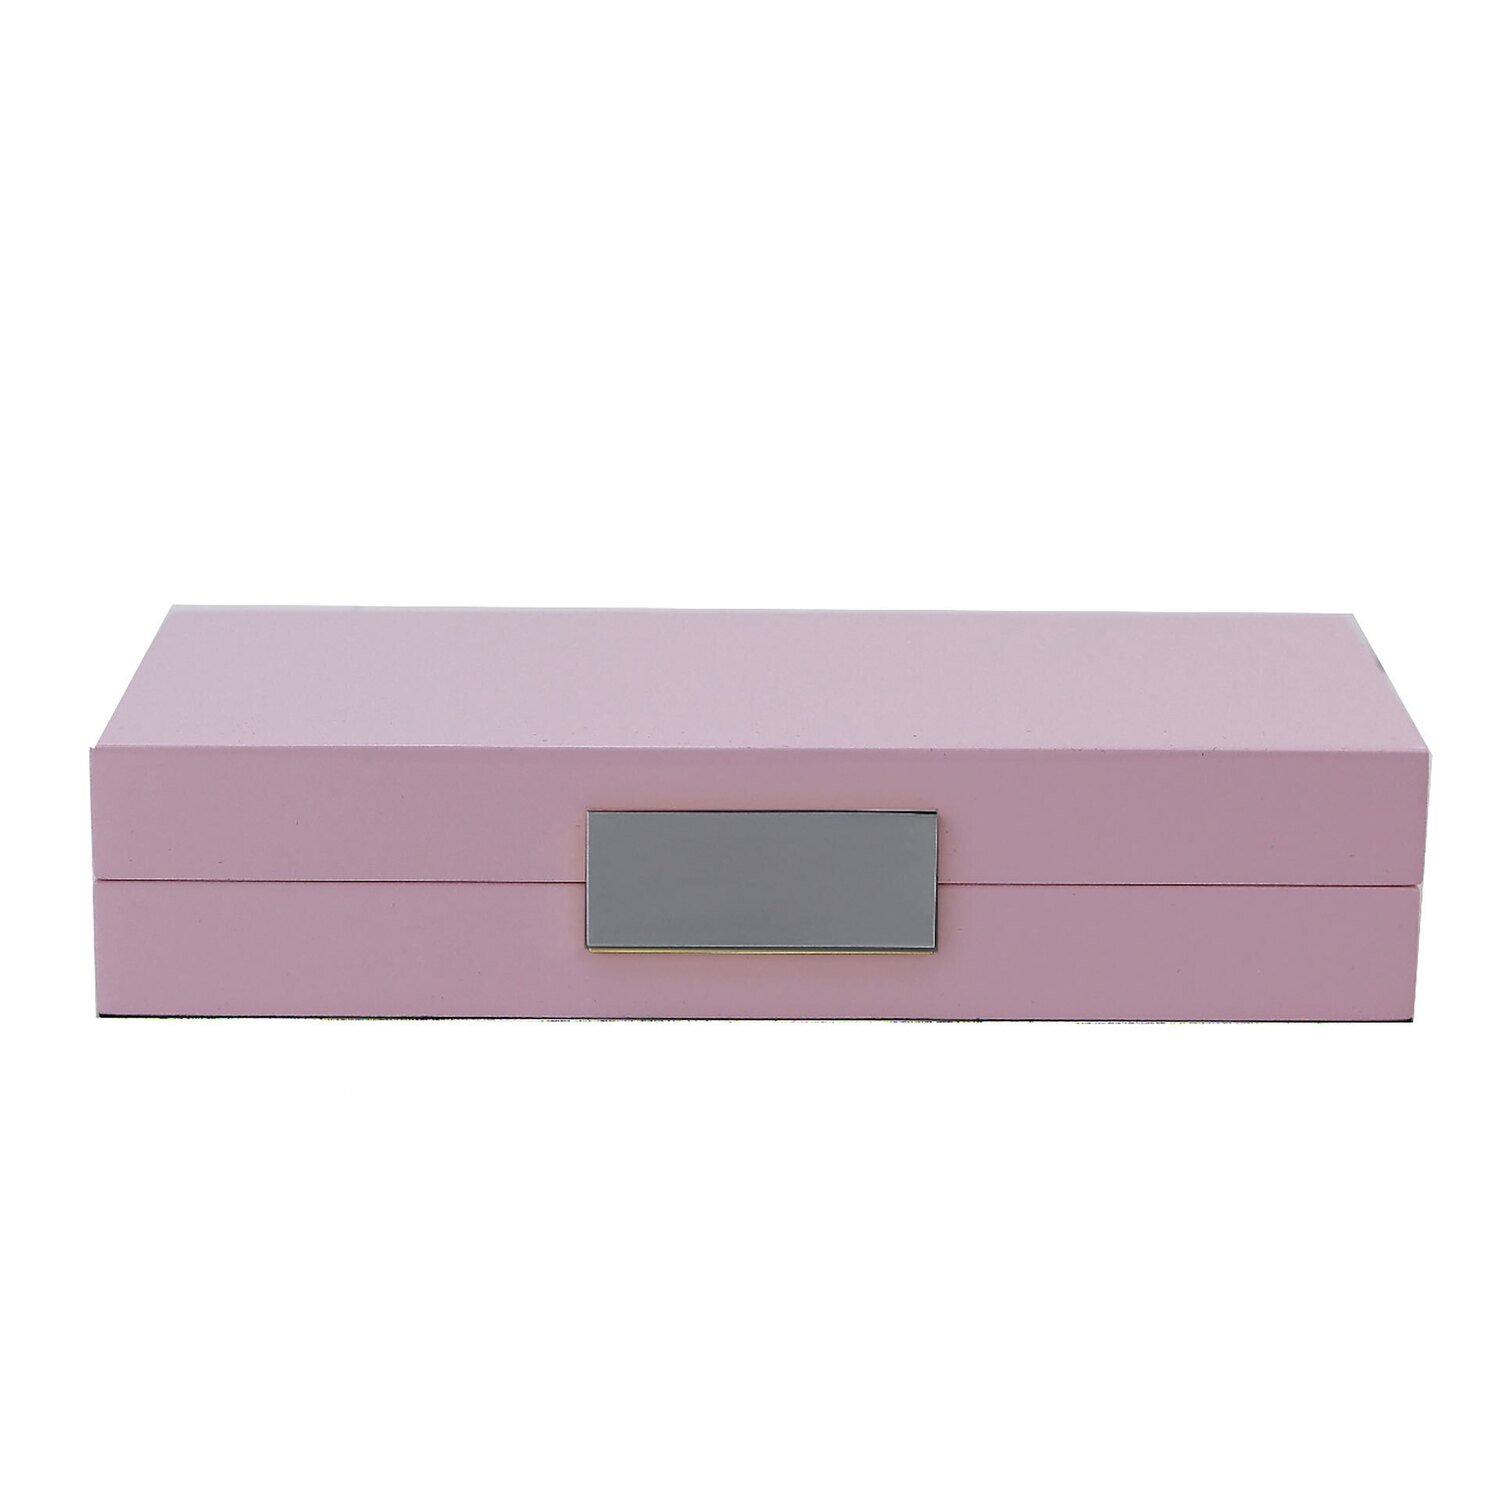 Addison Ross Pink Lacquer Box With Gold 4 x 9 Inch Lacquer BX1200